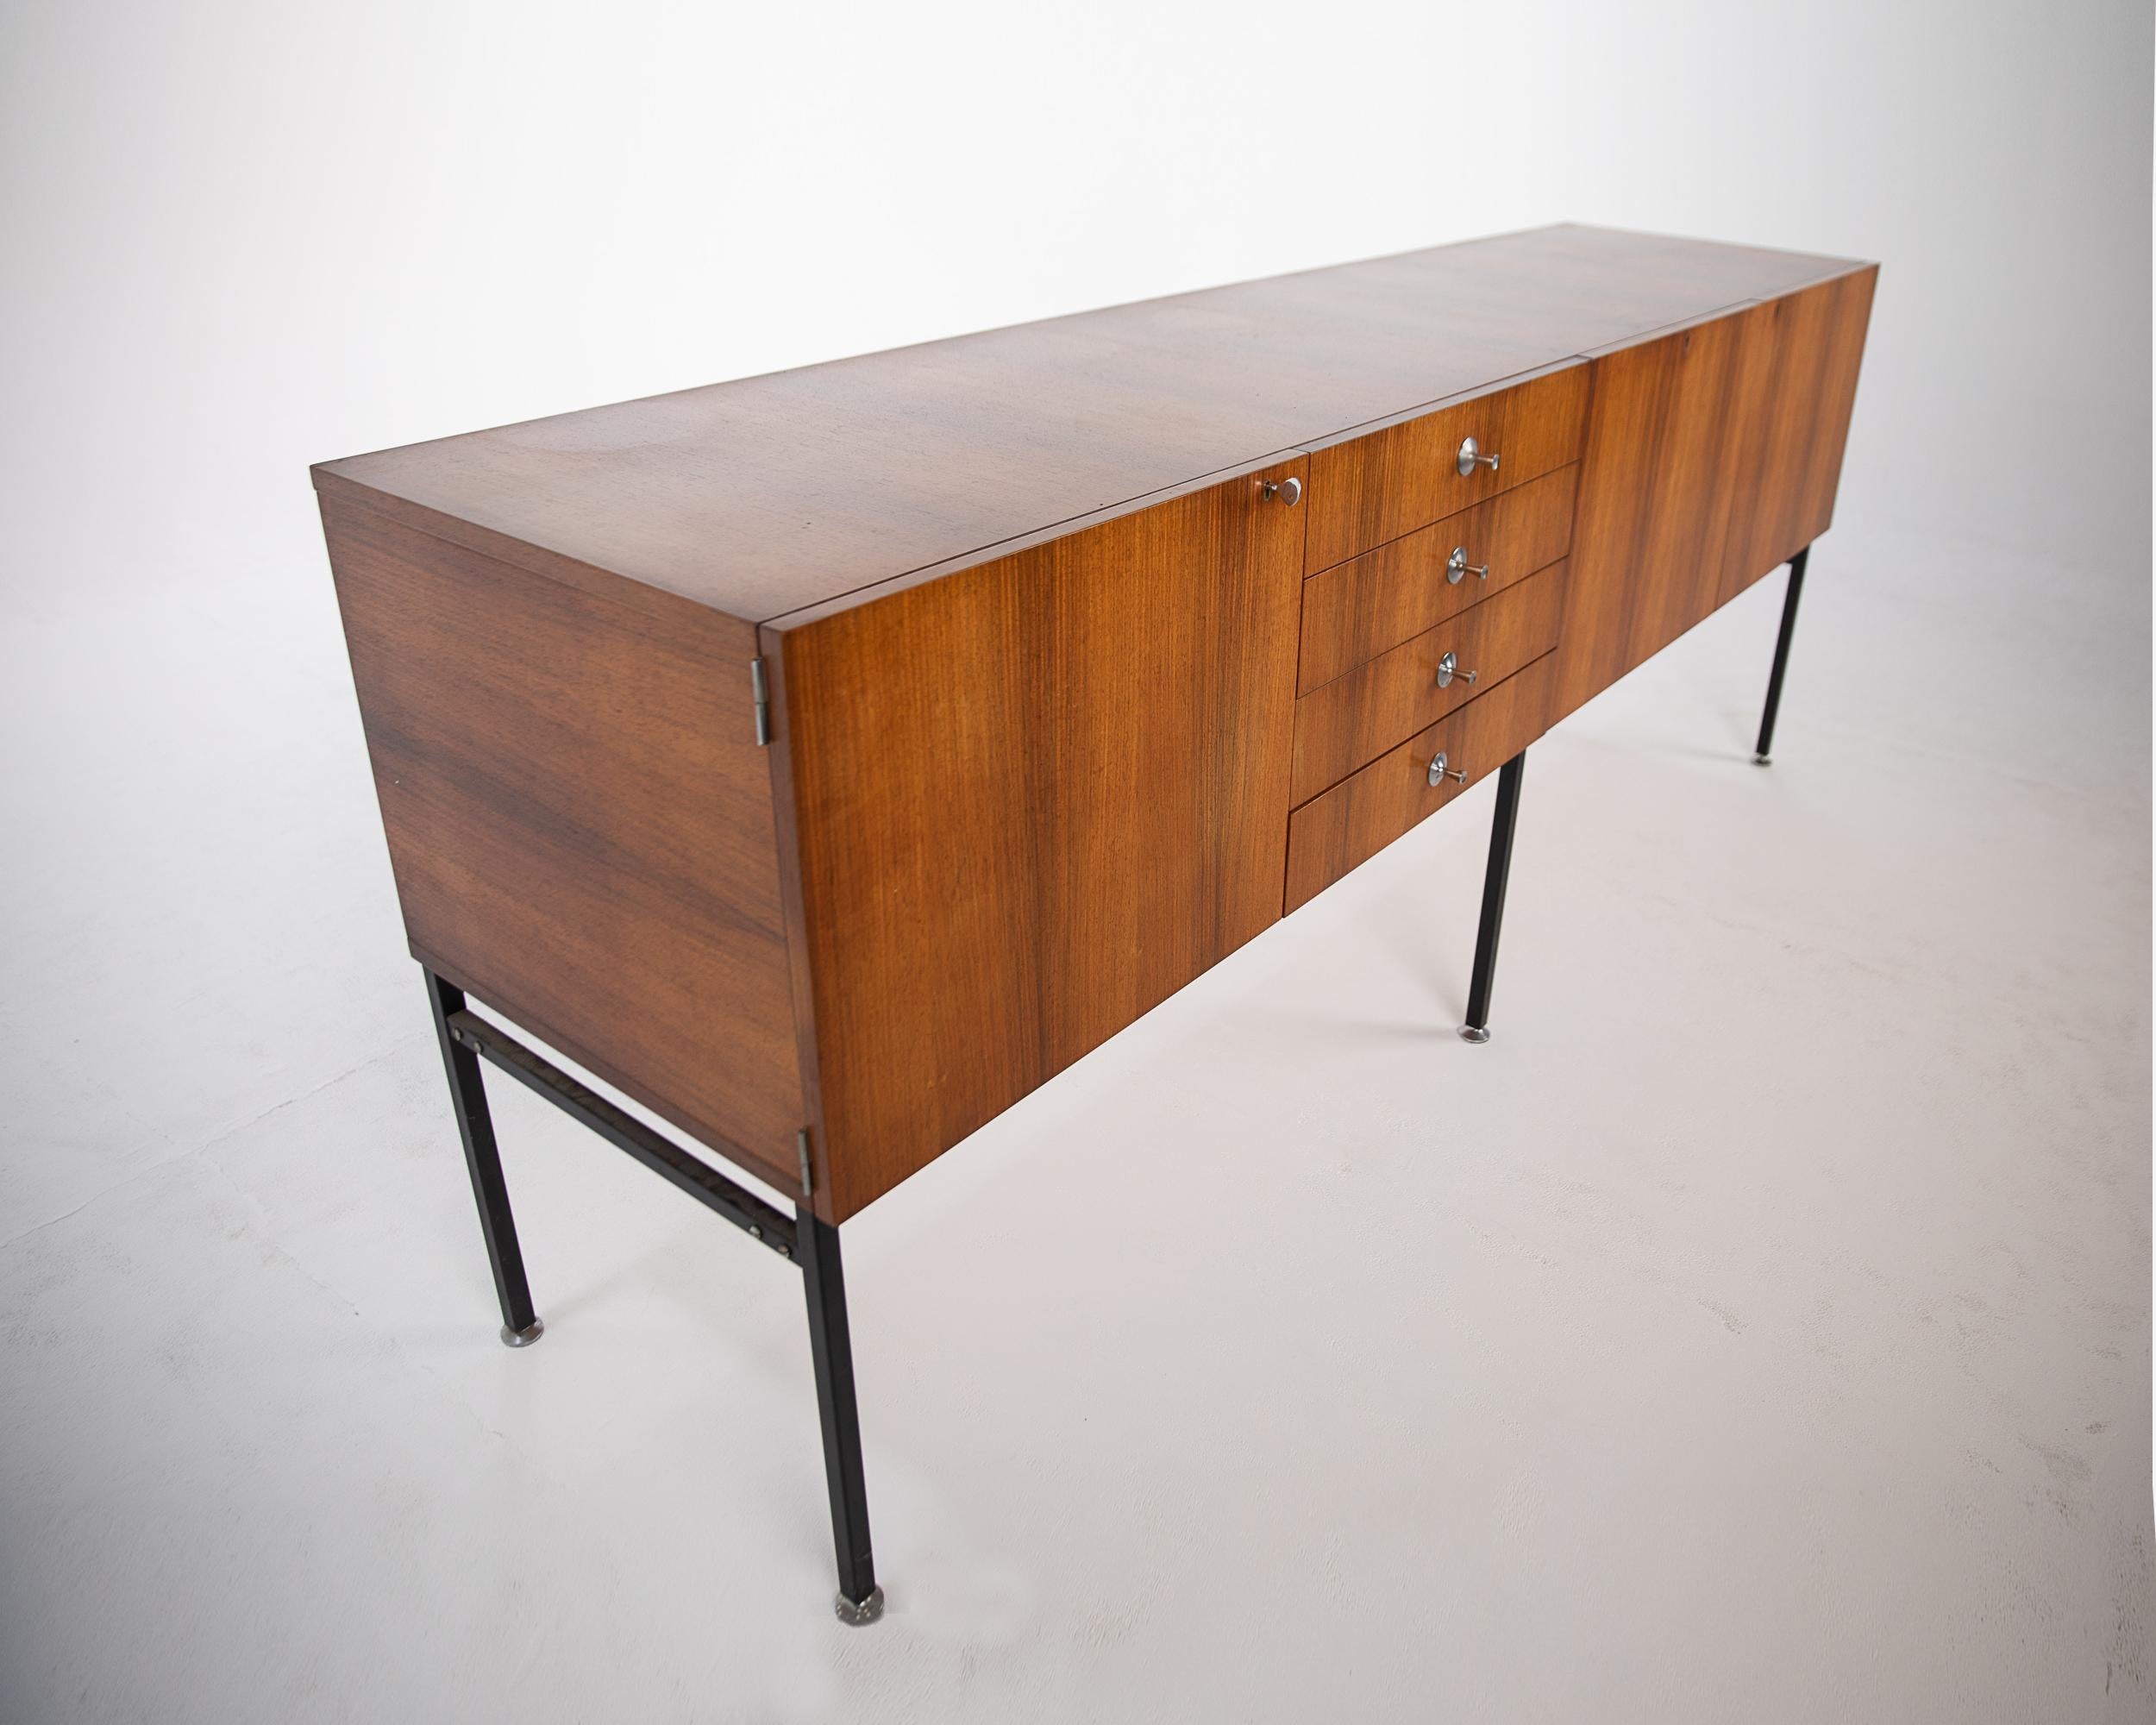 Large sideboard with bar designed in 1958 by French designer Alain Richard for Meubles TV.
Very good quality manufacturing. The body of the buffet, in oak veneer, rests on a black lacquered steel base. The adjustable feet are in chrome steel as are